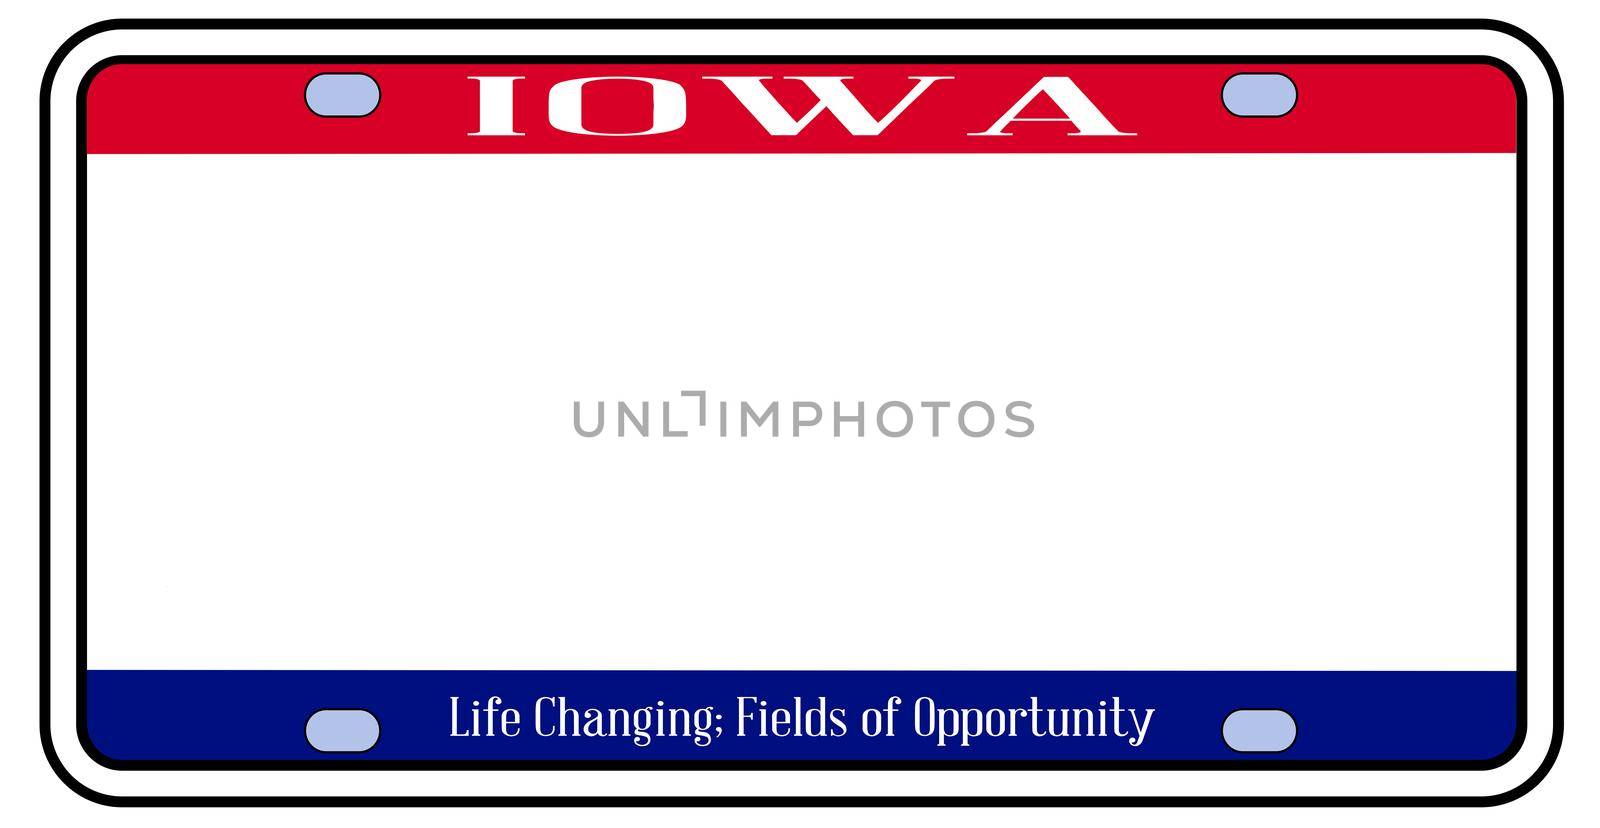 Blank Iowa state license plate in the colors of the state flag over a white background